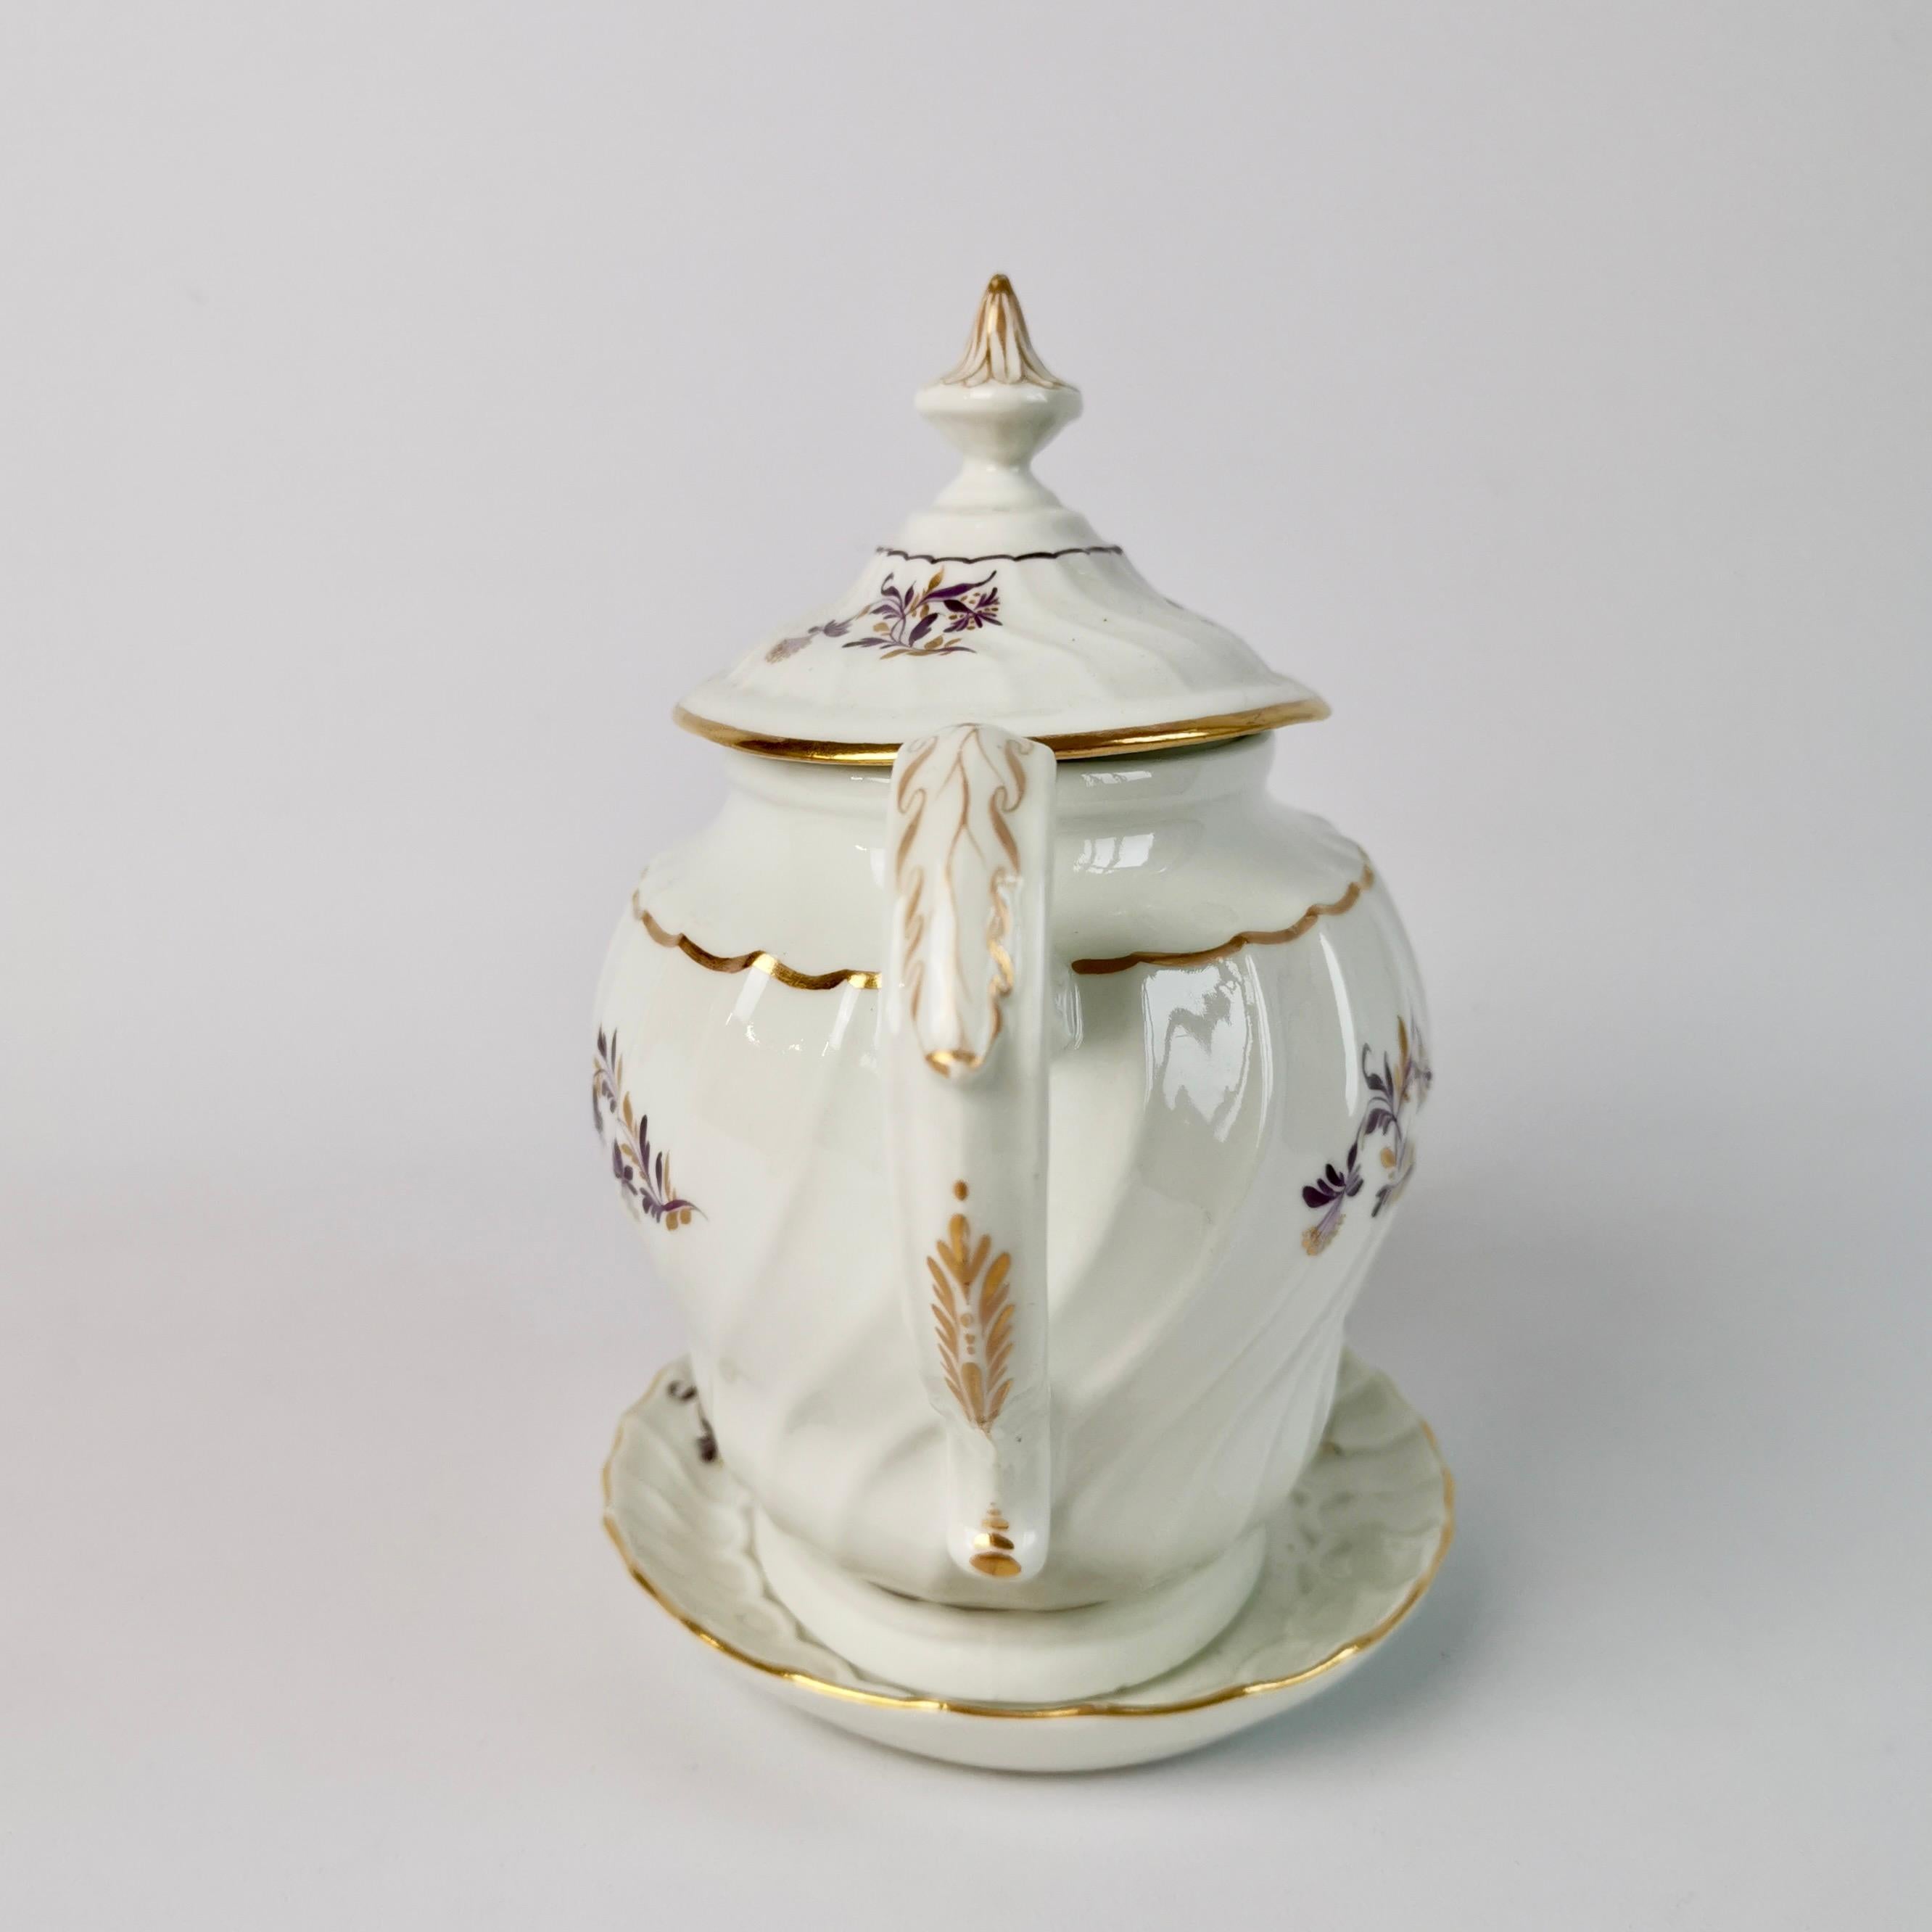 This is a beautiful teapot on a stand, made by Flight & Barr in or shortly after 1792. The items are in the 